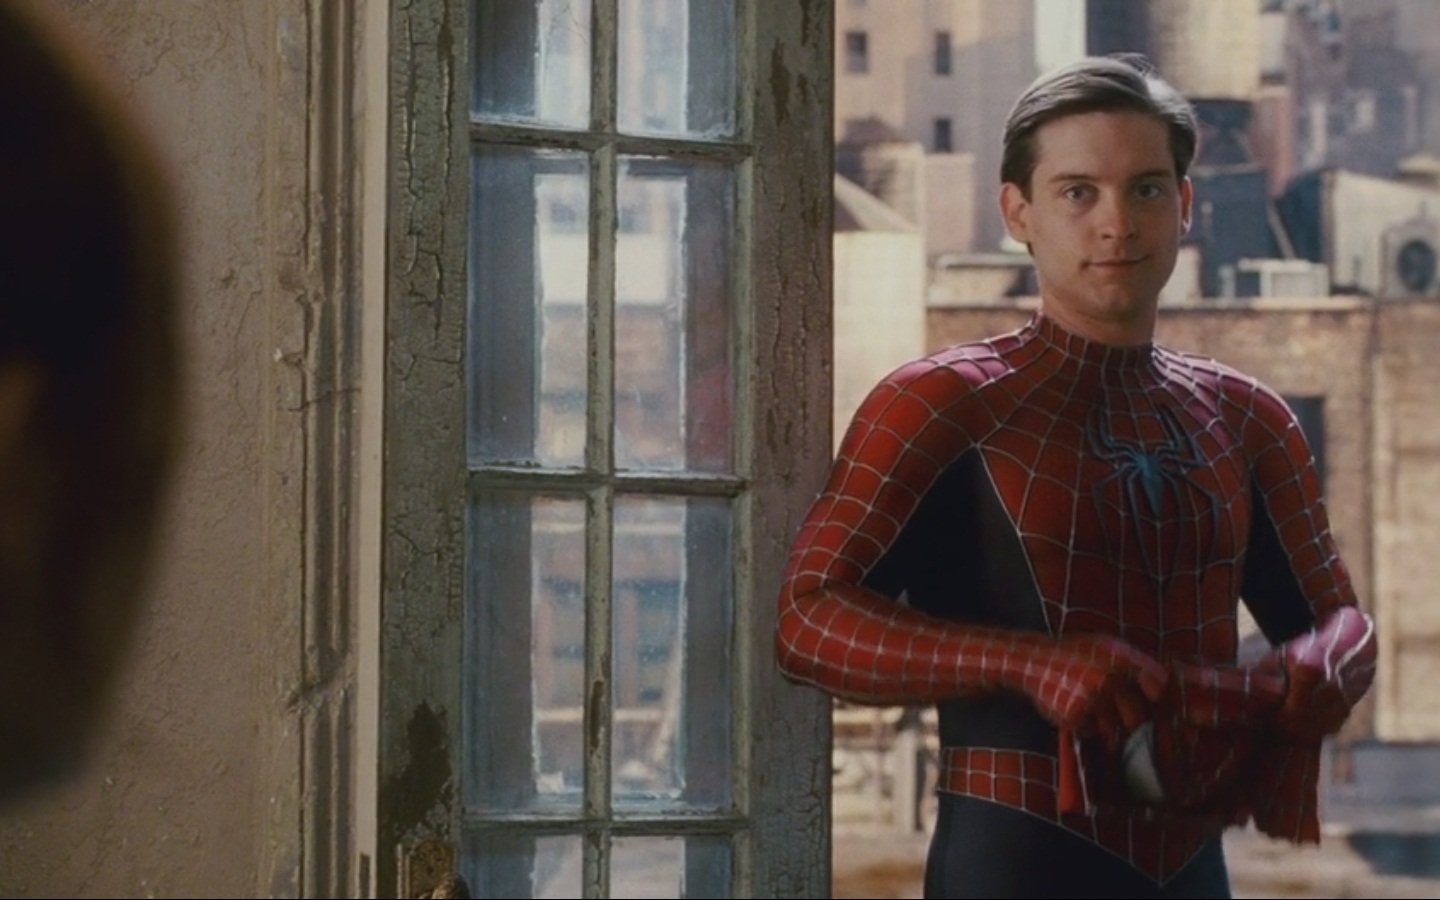 5833354 / 1440x900 tobey maguire windows wallpapers.